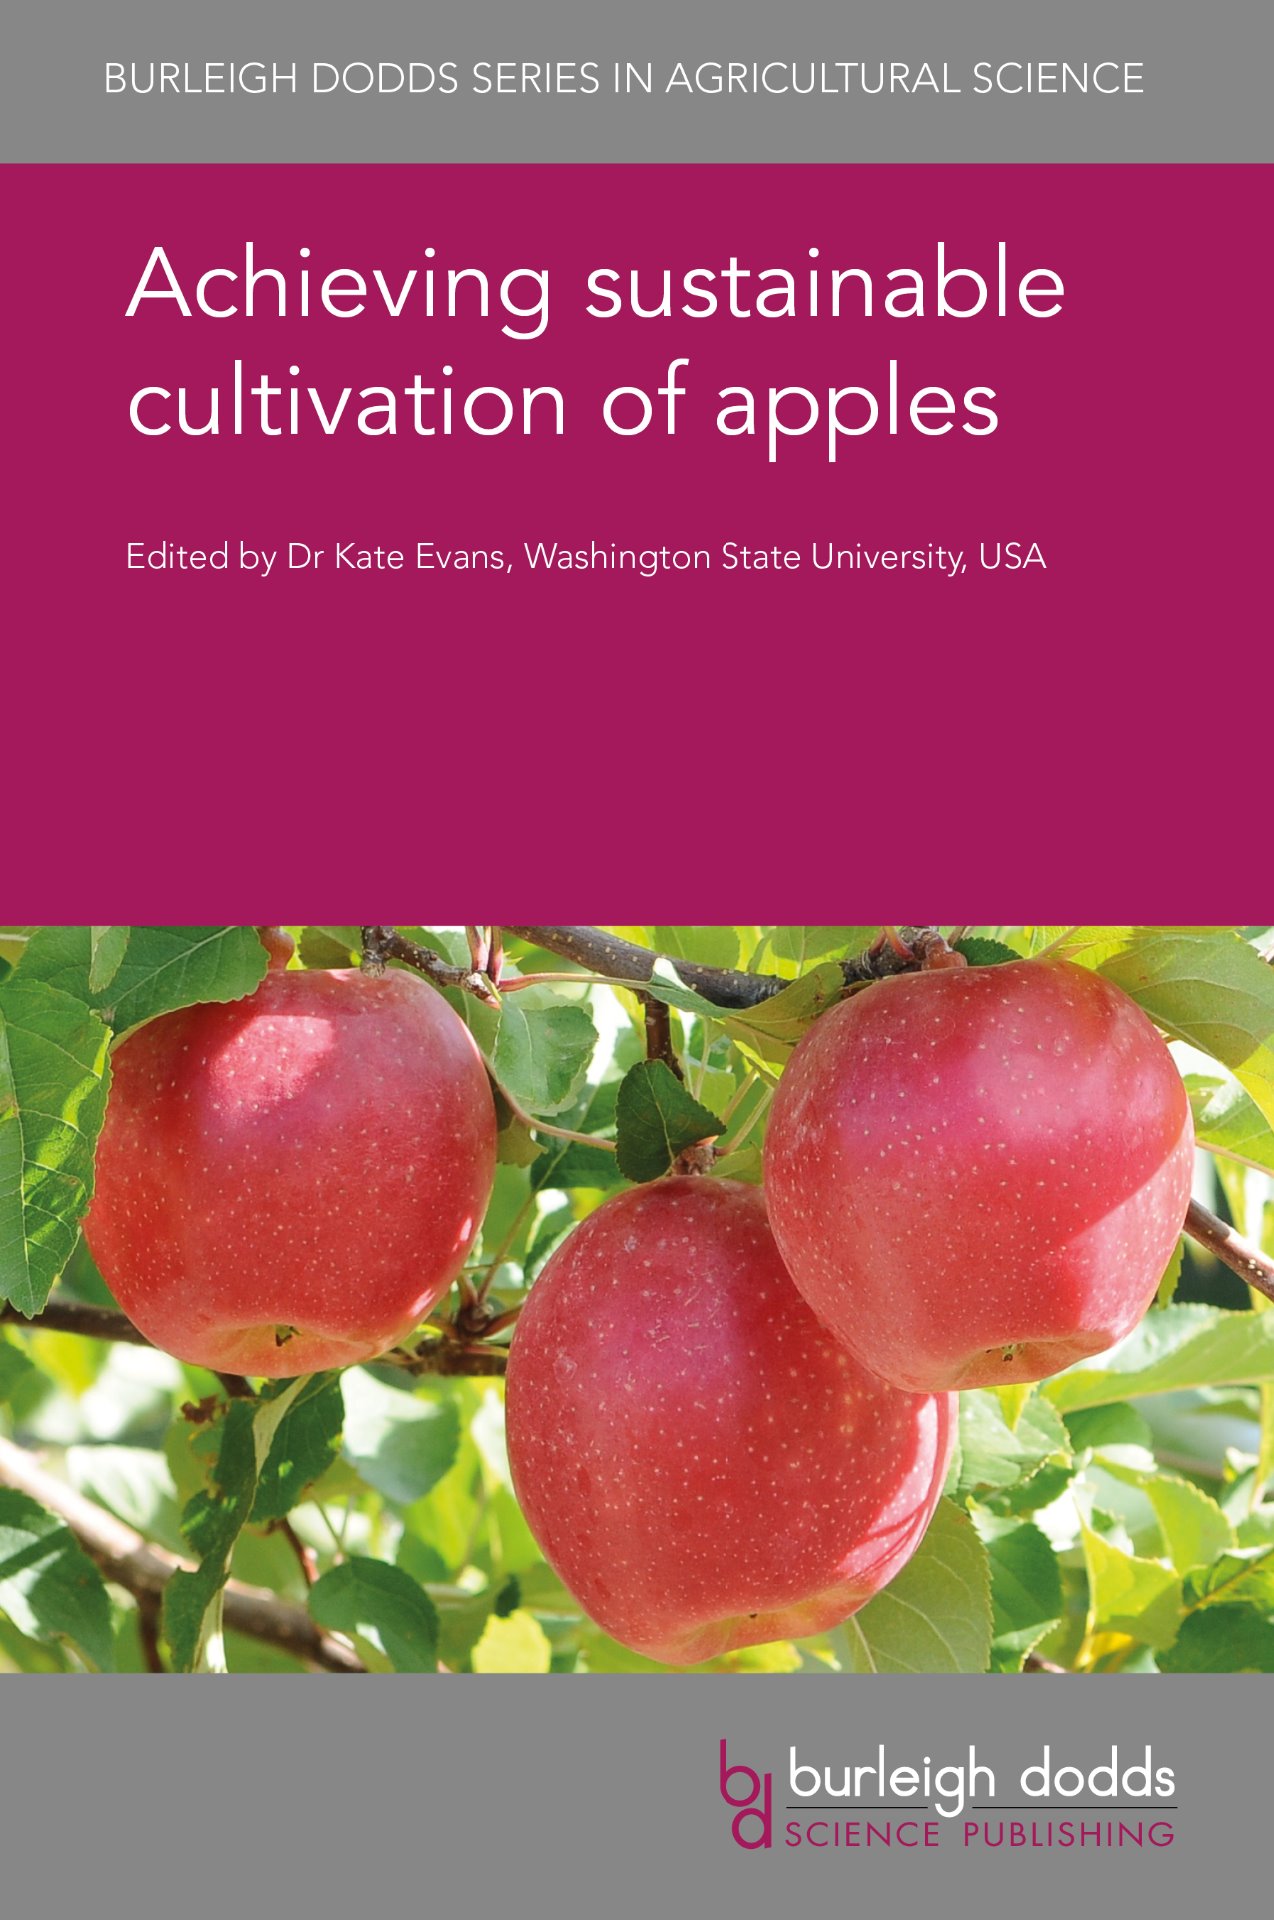 Achieving sustainable cultivation of apples